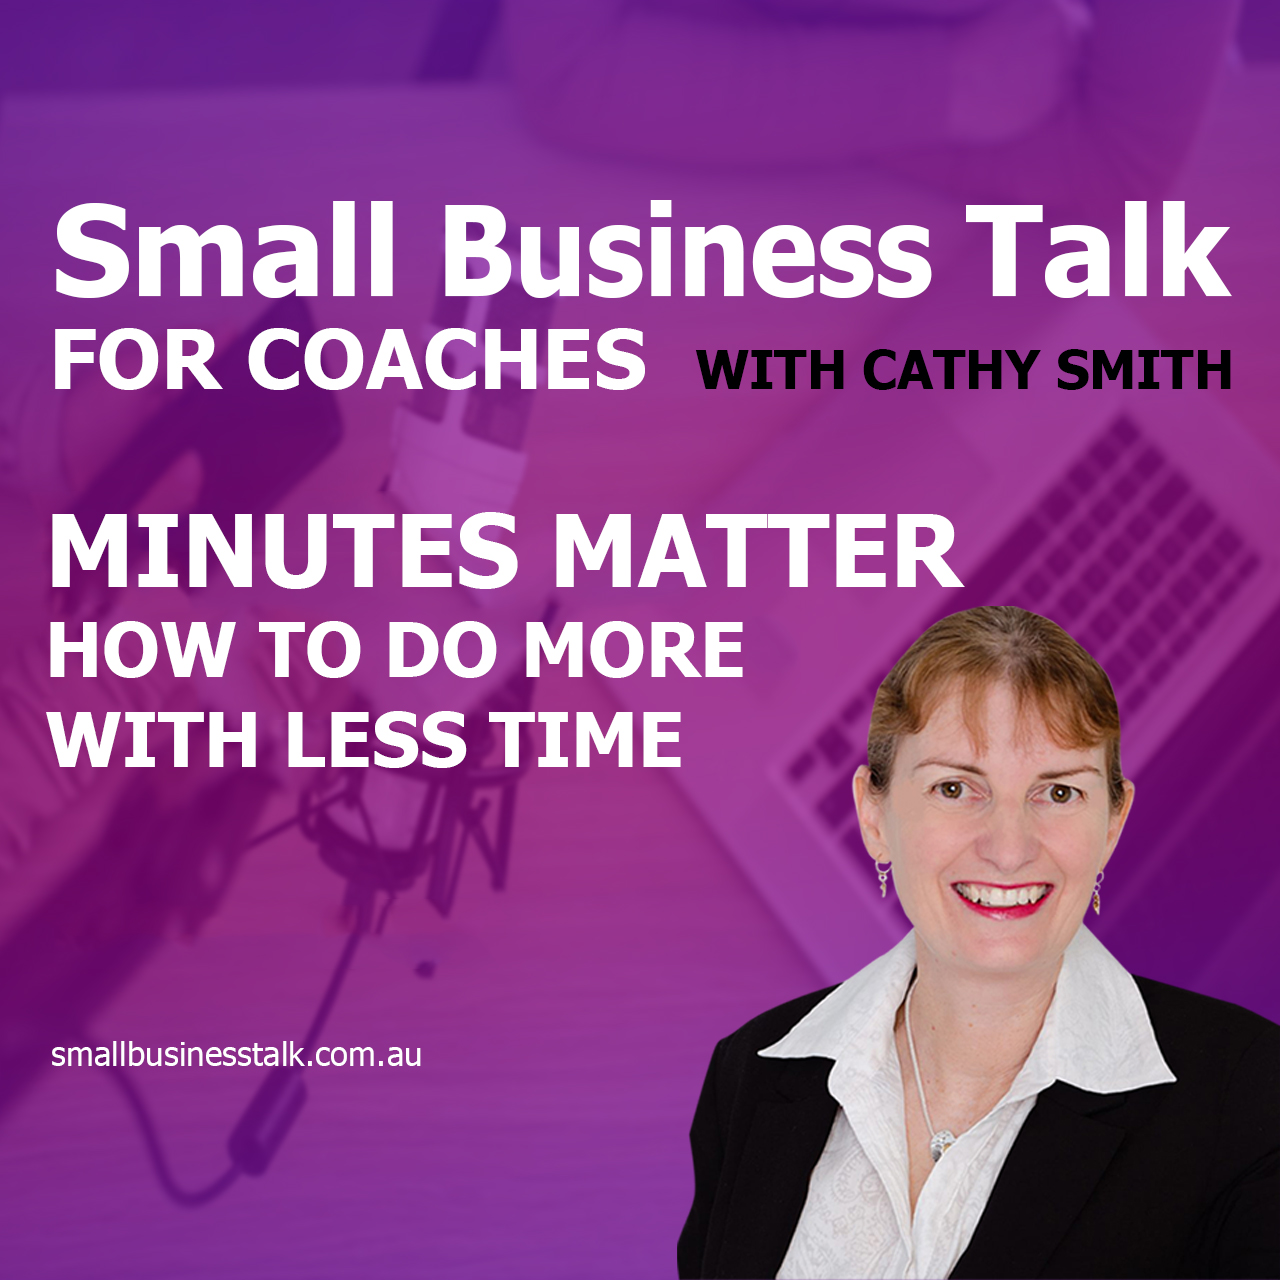 Minutes Matter, How to do more with less time